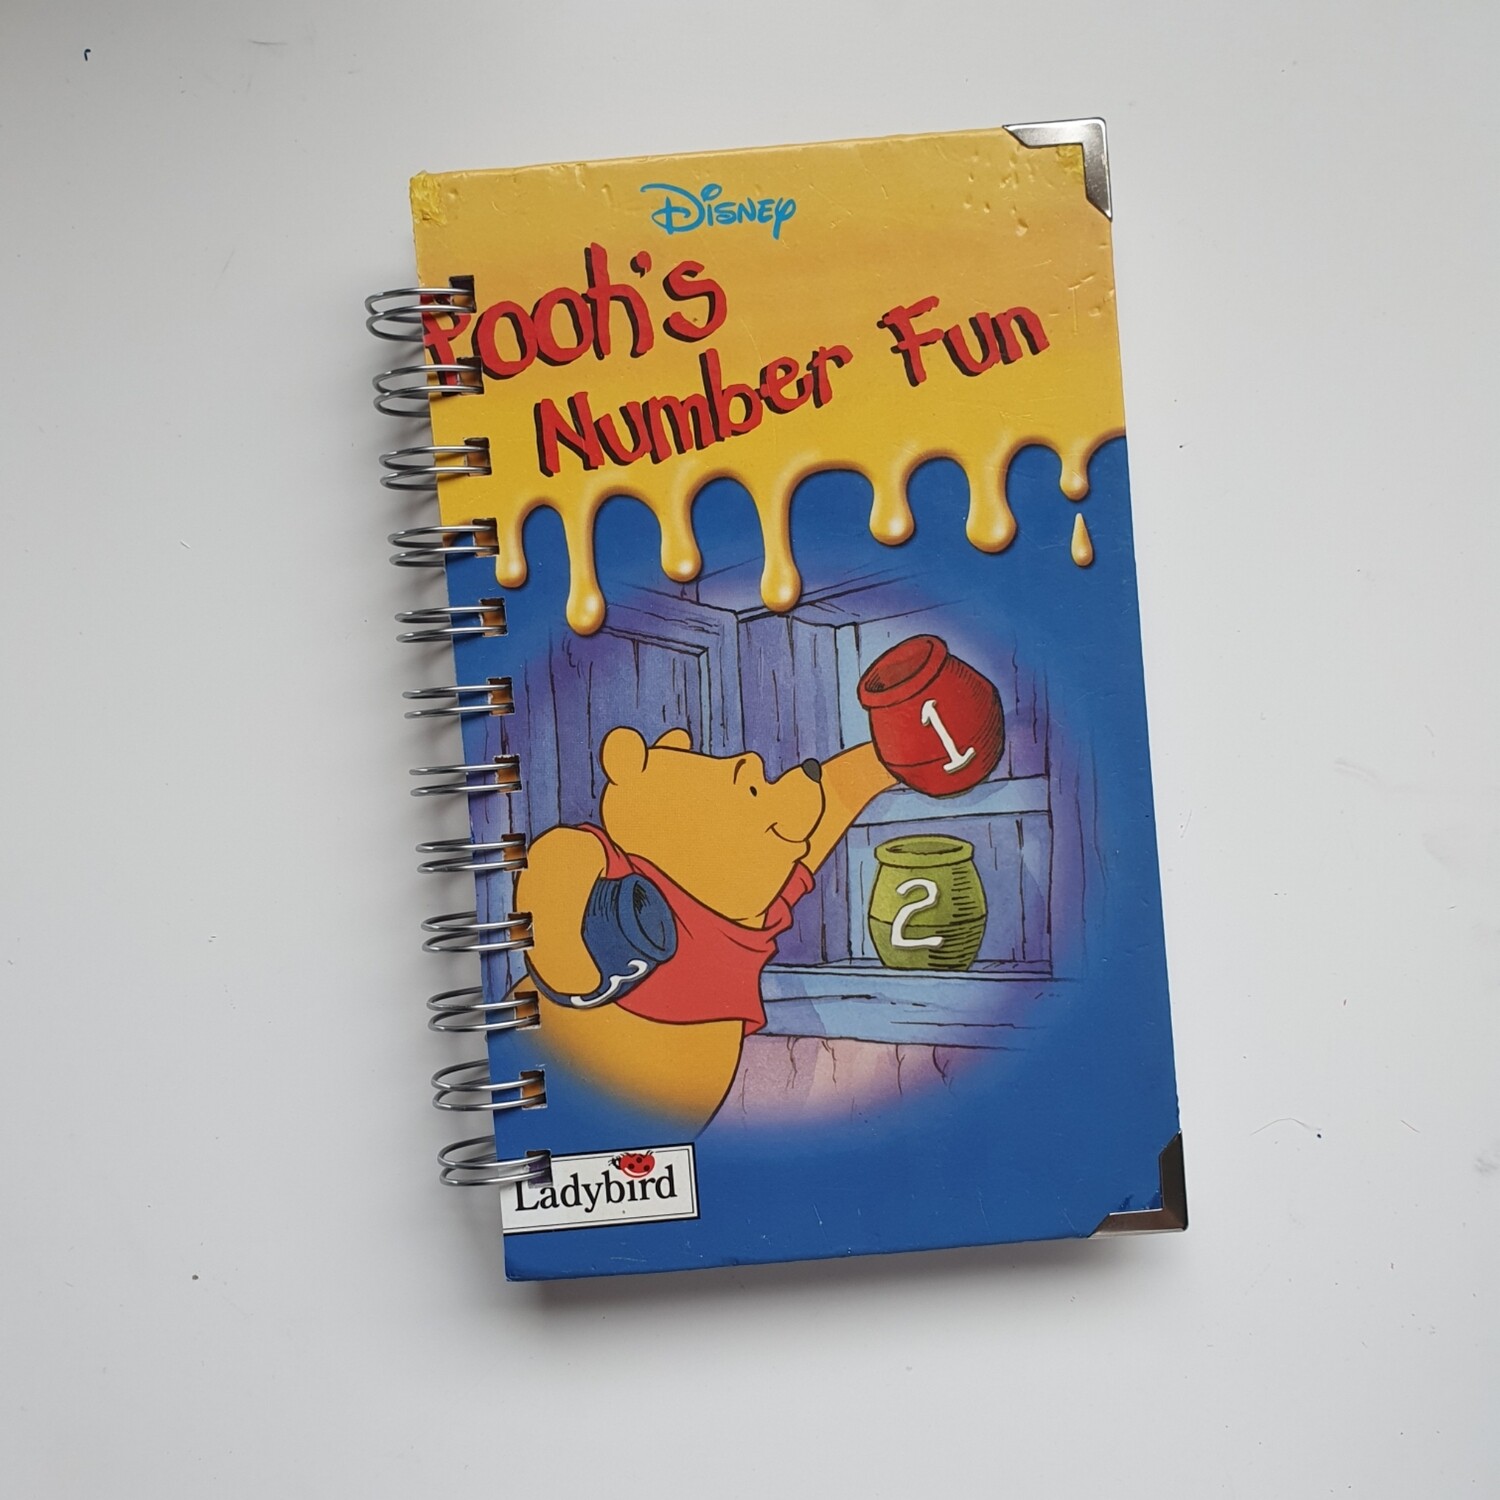 Winnie the Pooh Number Fun Plain Paper Notebook made from a Ladybird Book